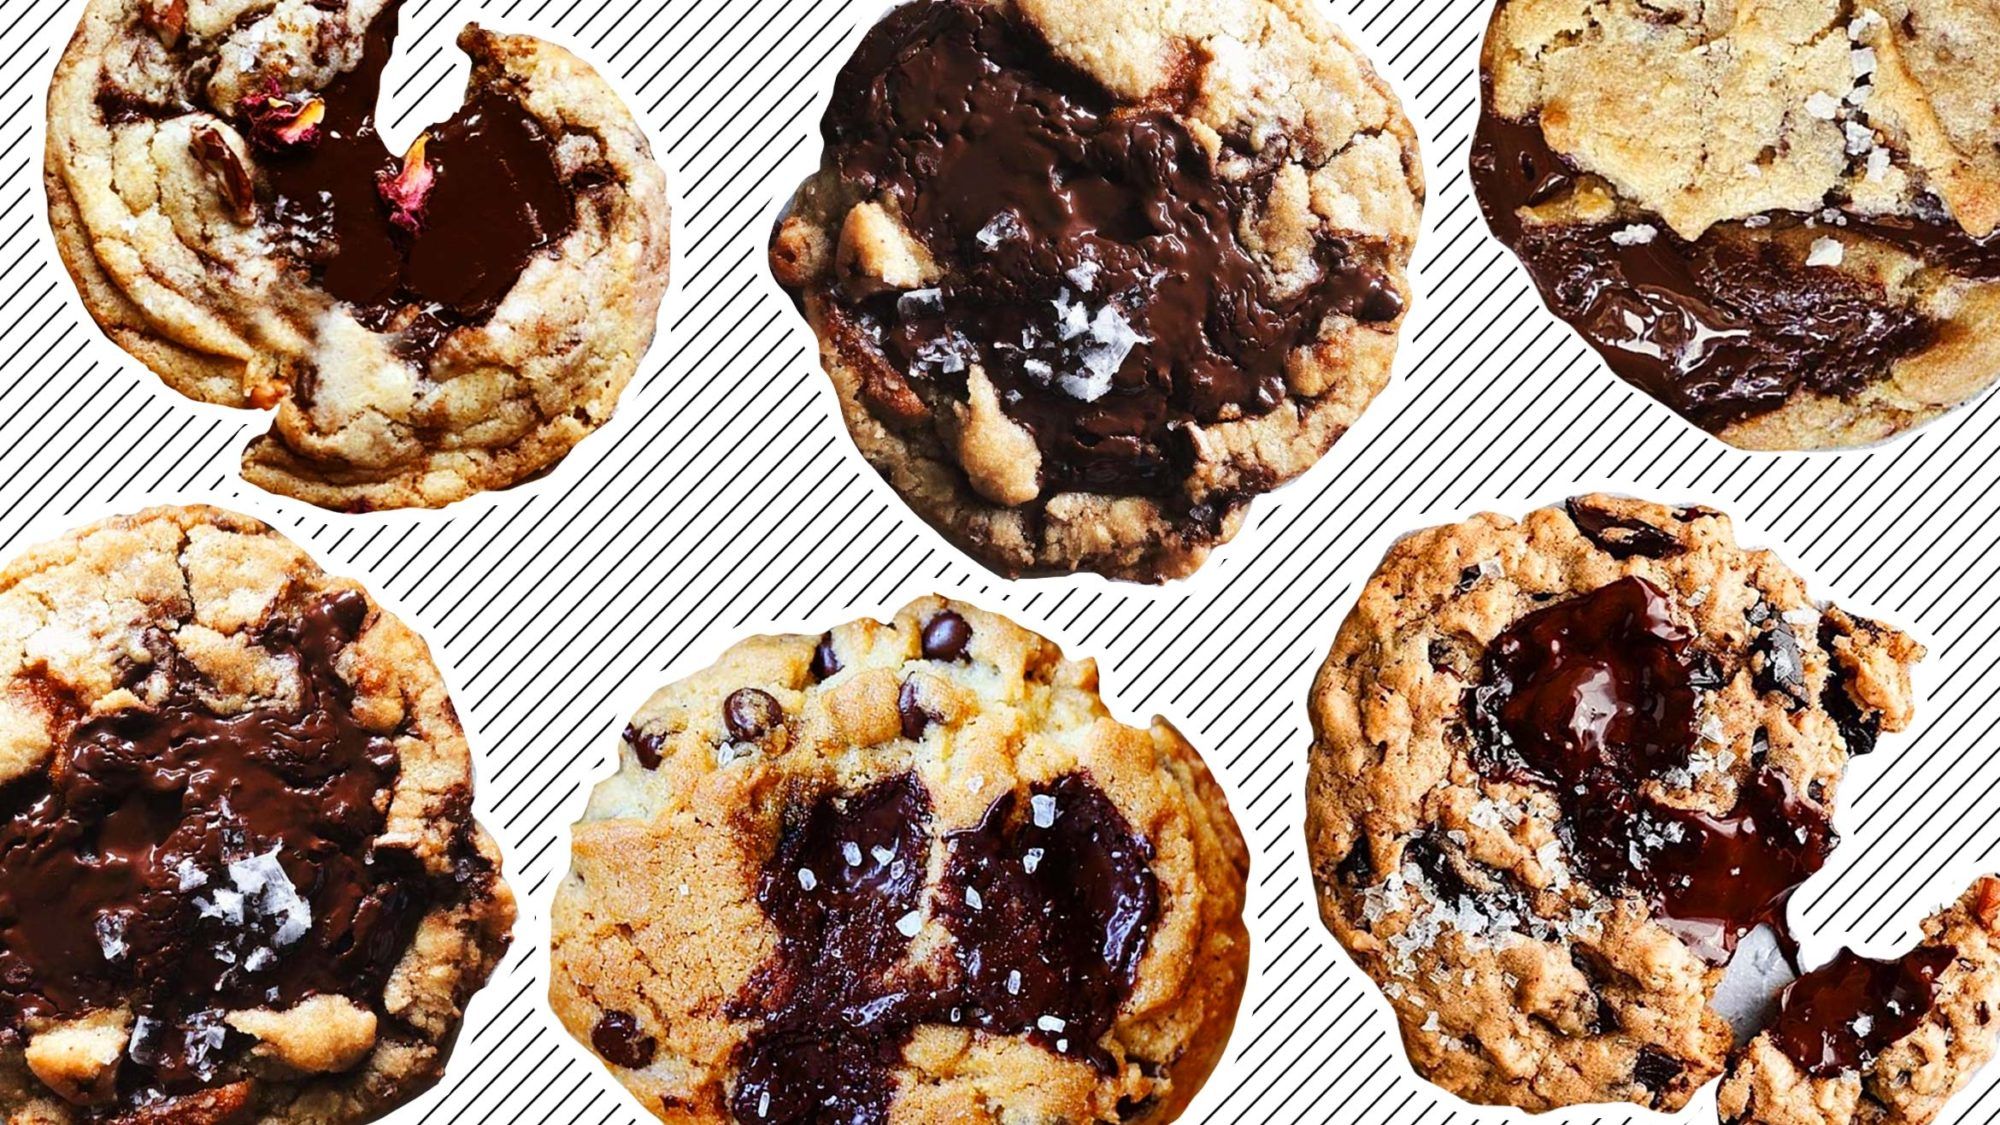 Article-Instagram-Ruined-the-Chocolate-Chip-Cookie